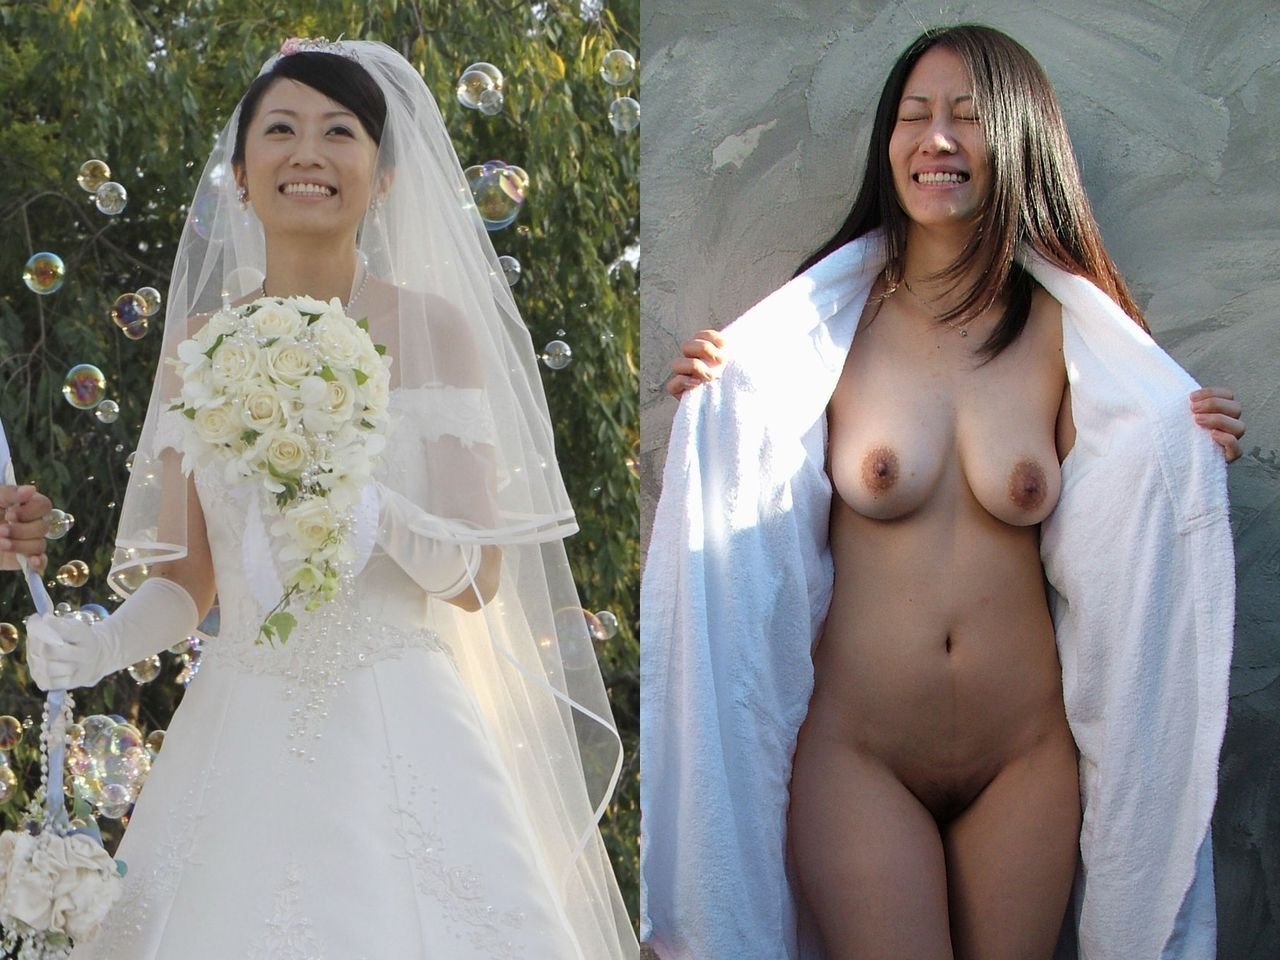 agus hanafi add photo pictures of naked brides